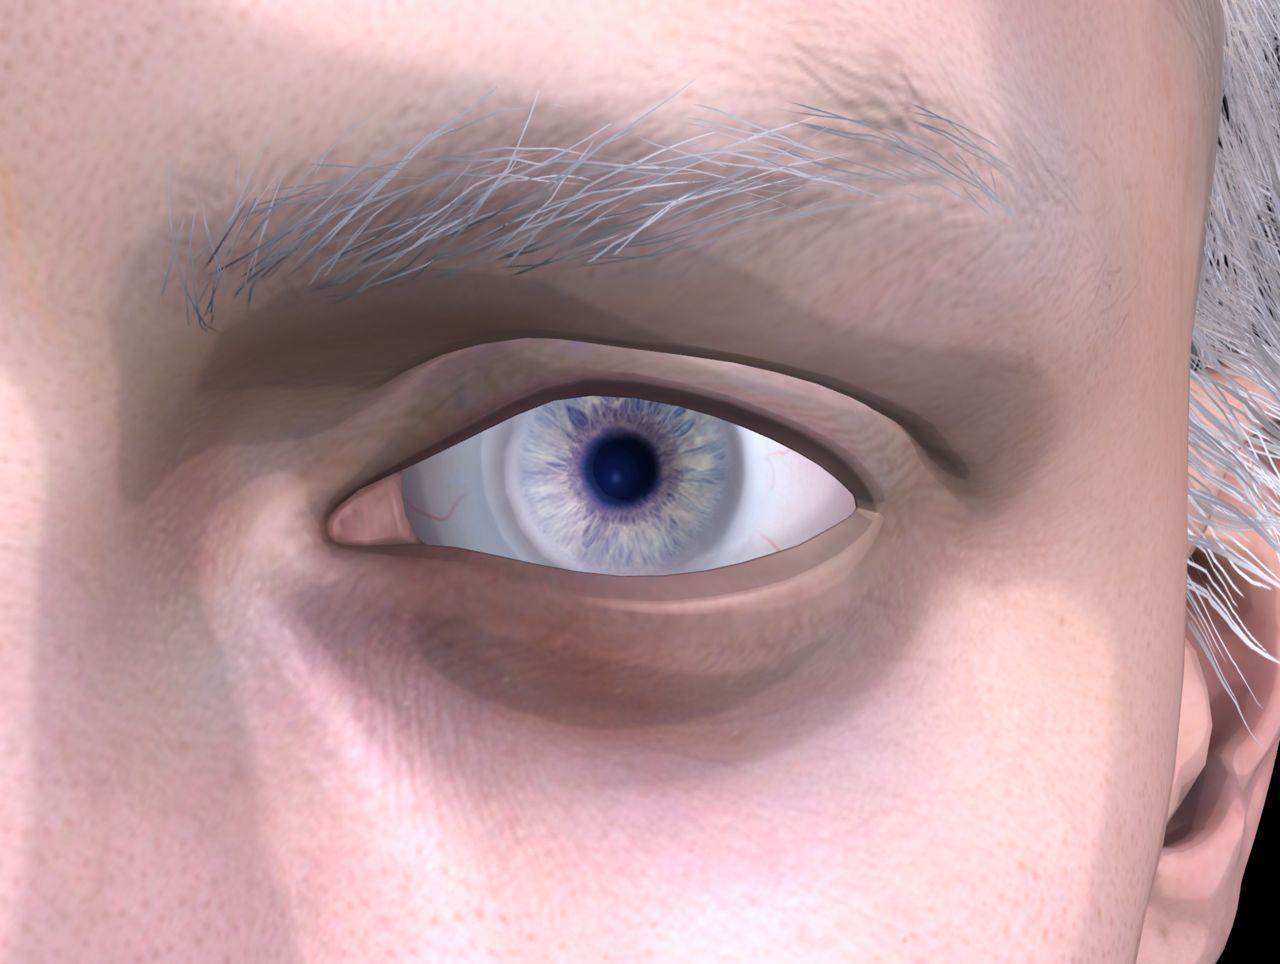 [J.A.] DMC5 | Vergil Head Reference PNG 53